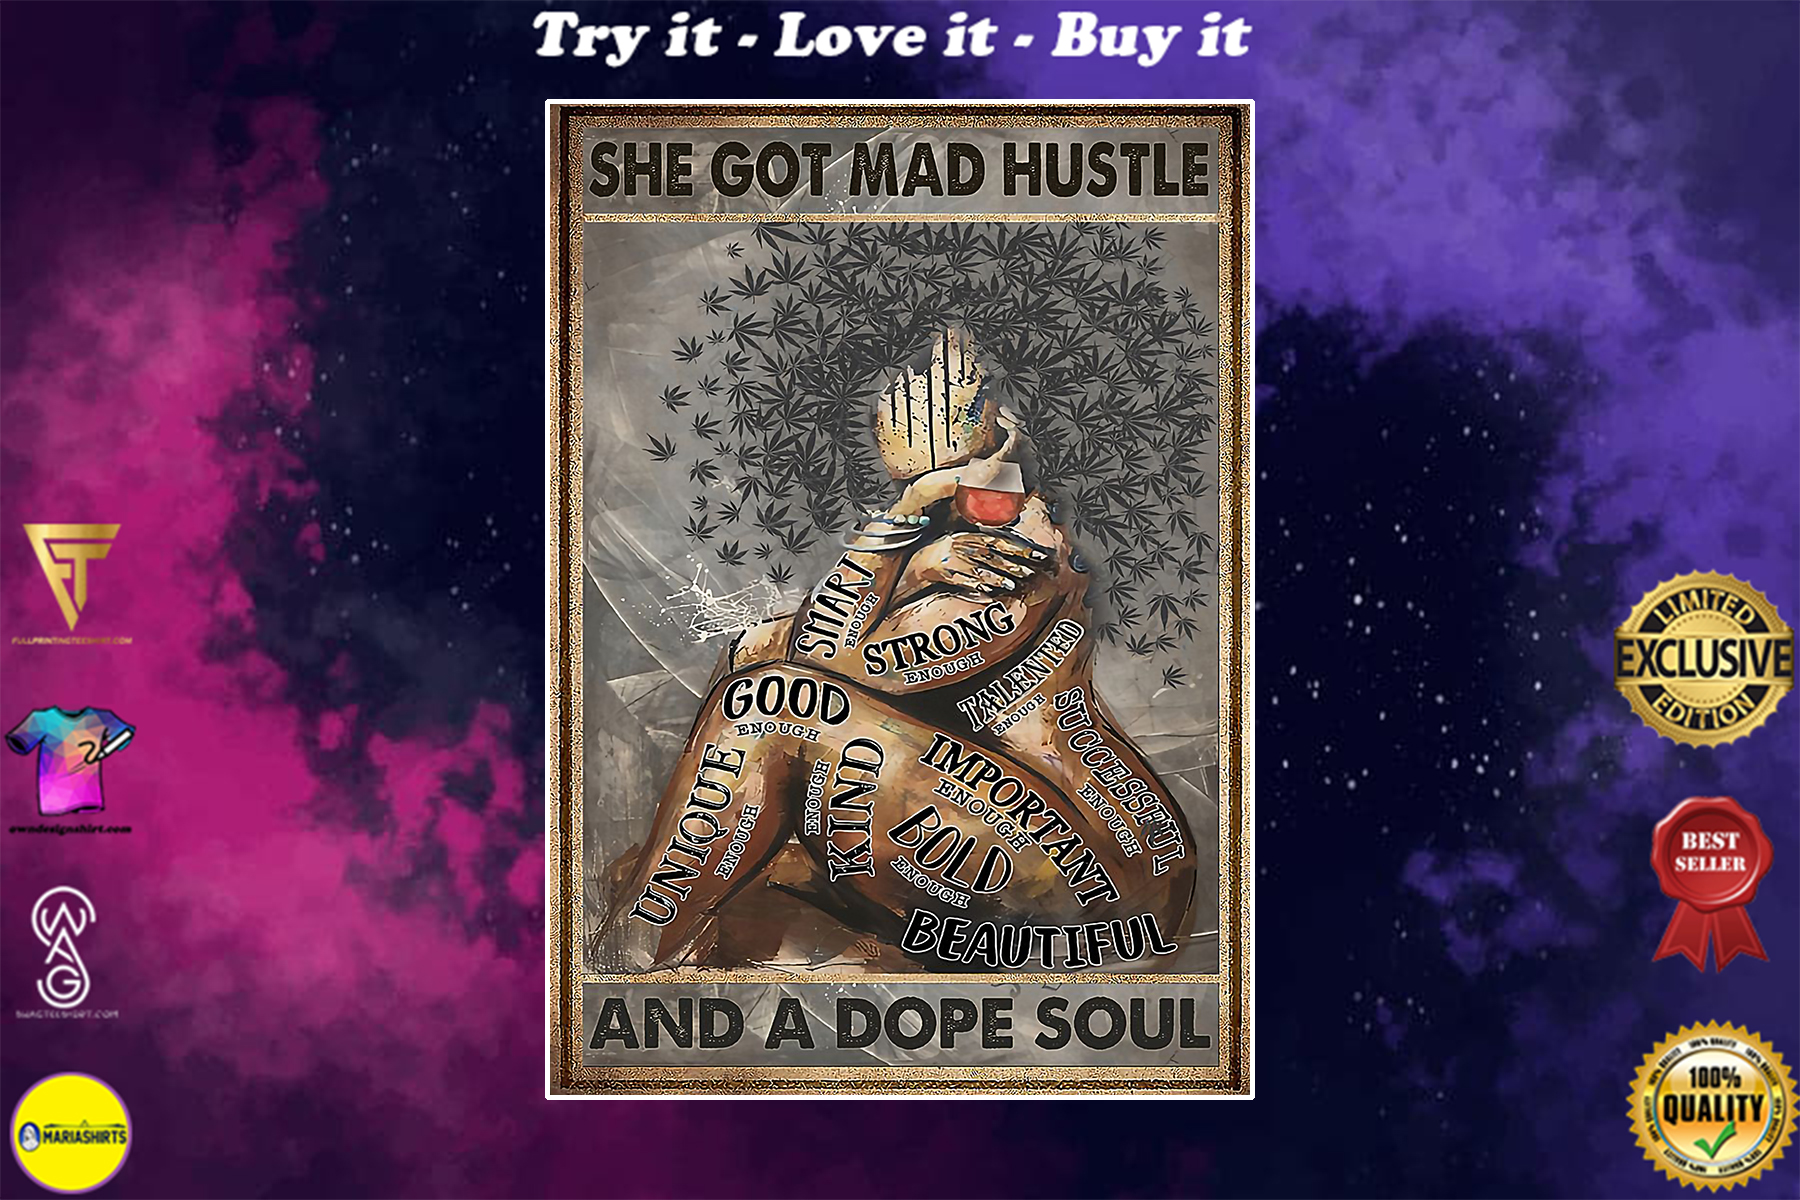 vintage black girl with wine and music she got mad hustle and a dope soul poster